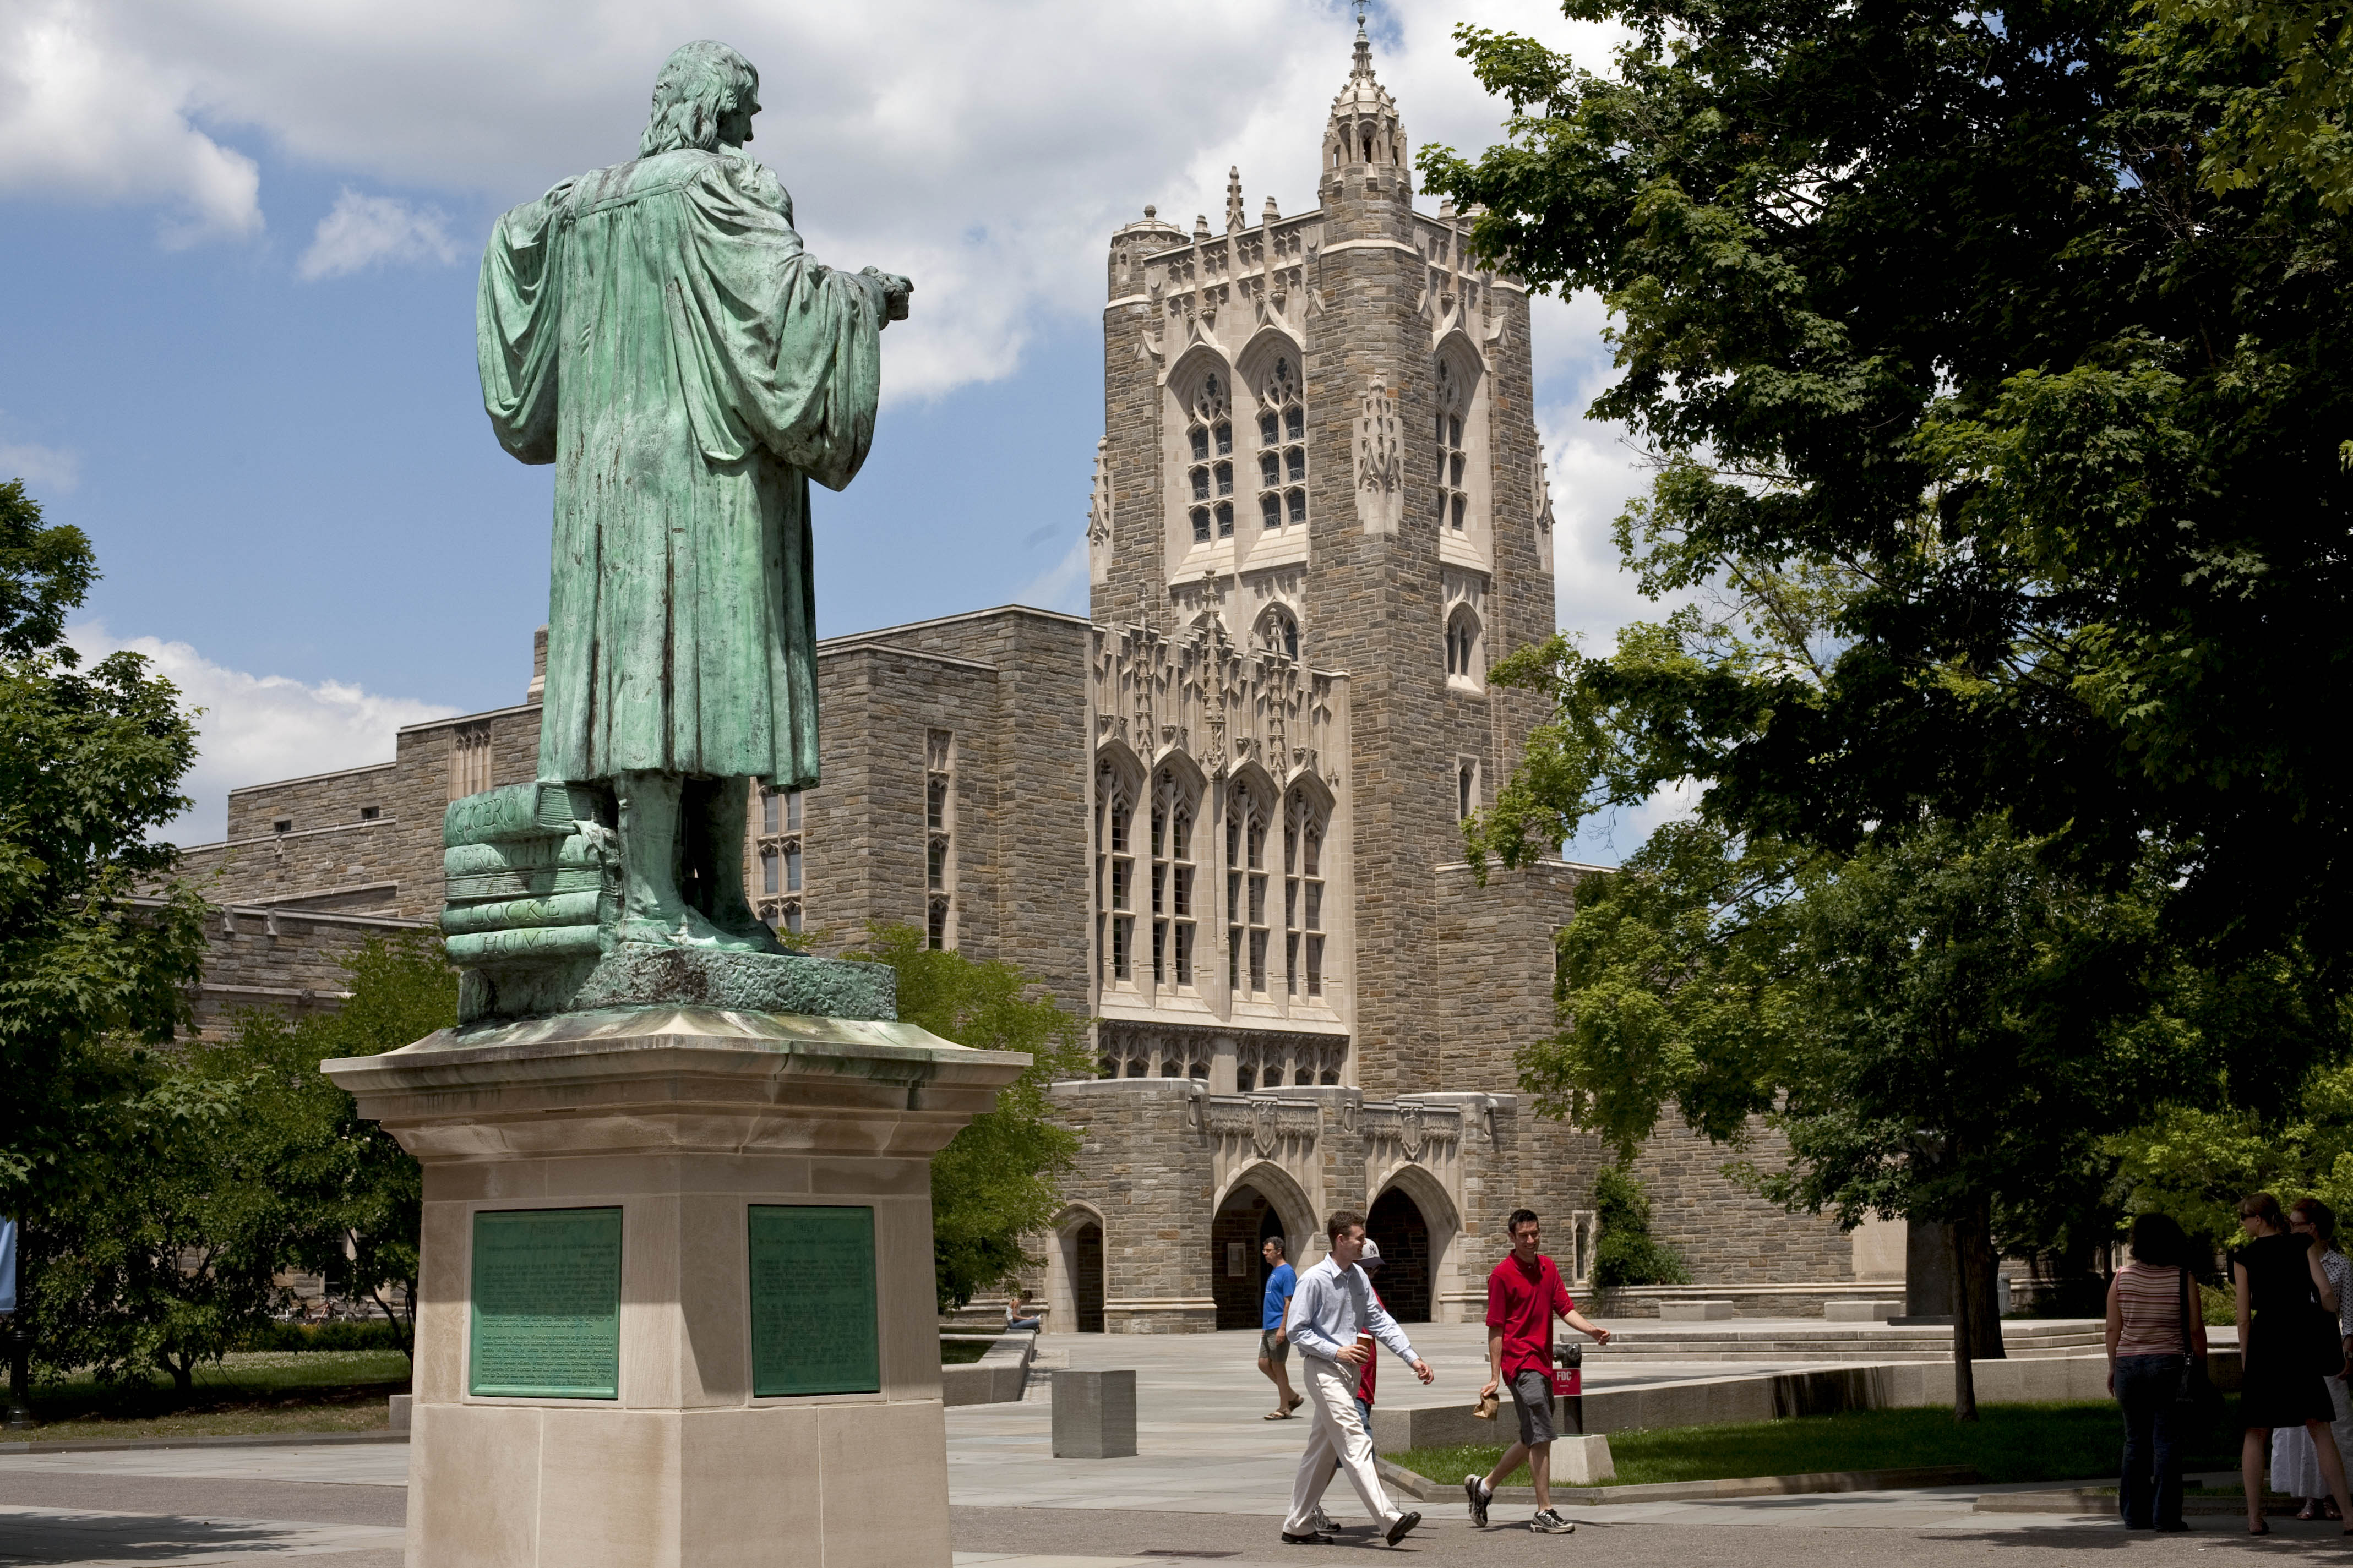 A statue of former Princeton University President John Witherspoon outside the East Pyne building on the Princeton University campus in Princeton, N.J.
